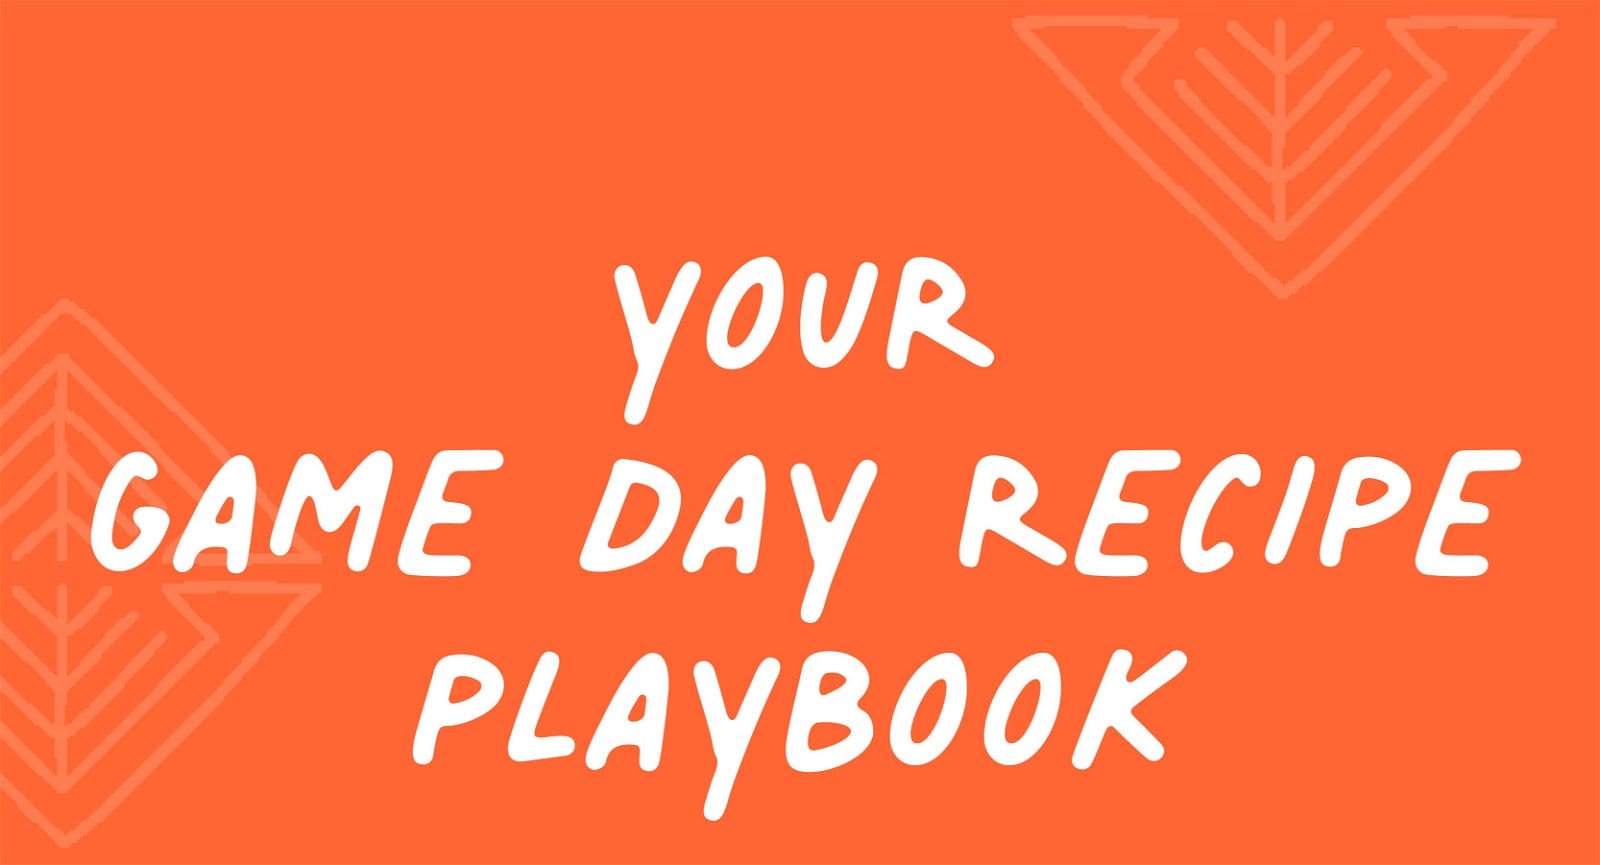 Your Game Day Recipe Playbook